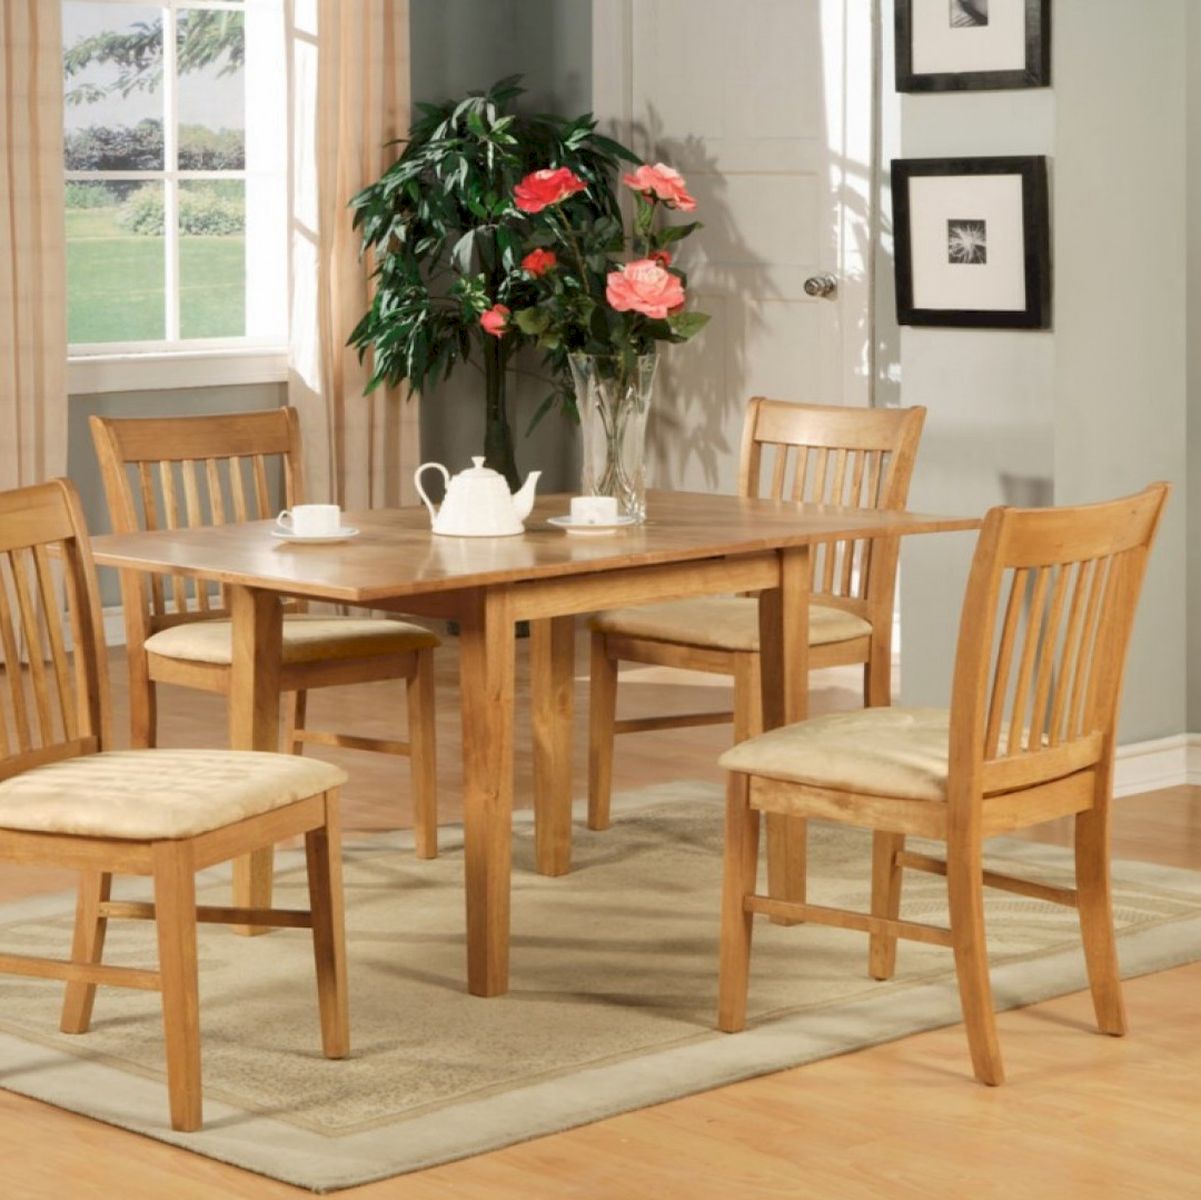 Small Kitchen Table Sets photo - 4